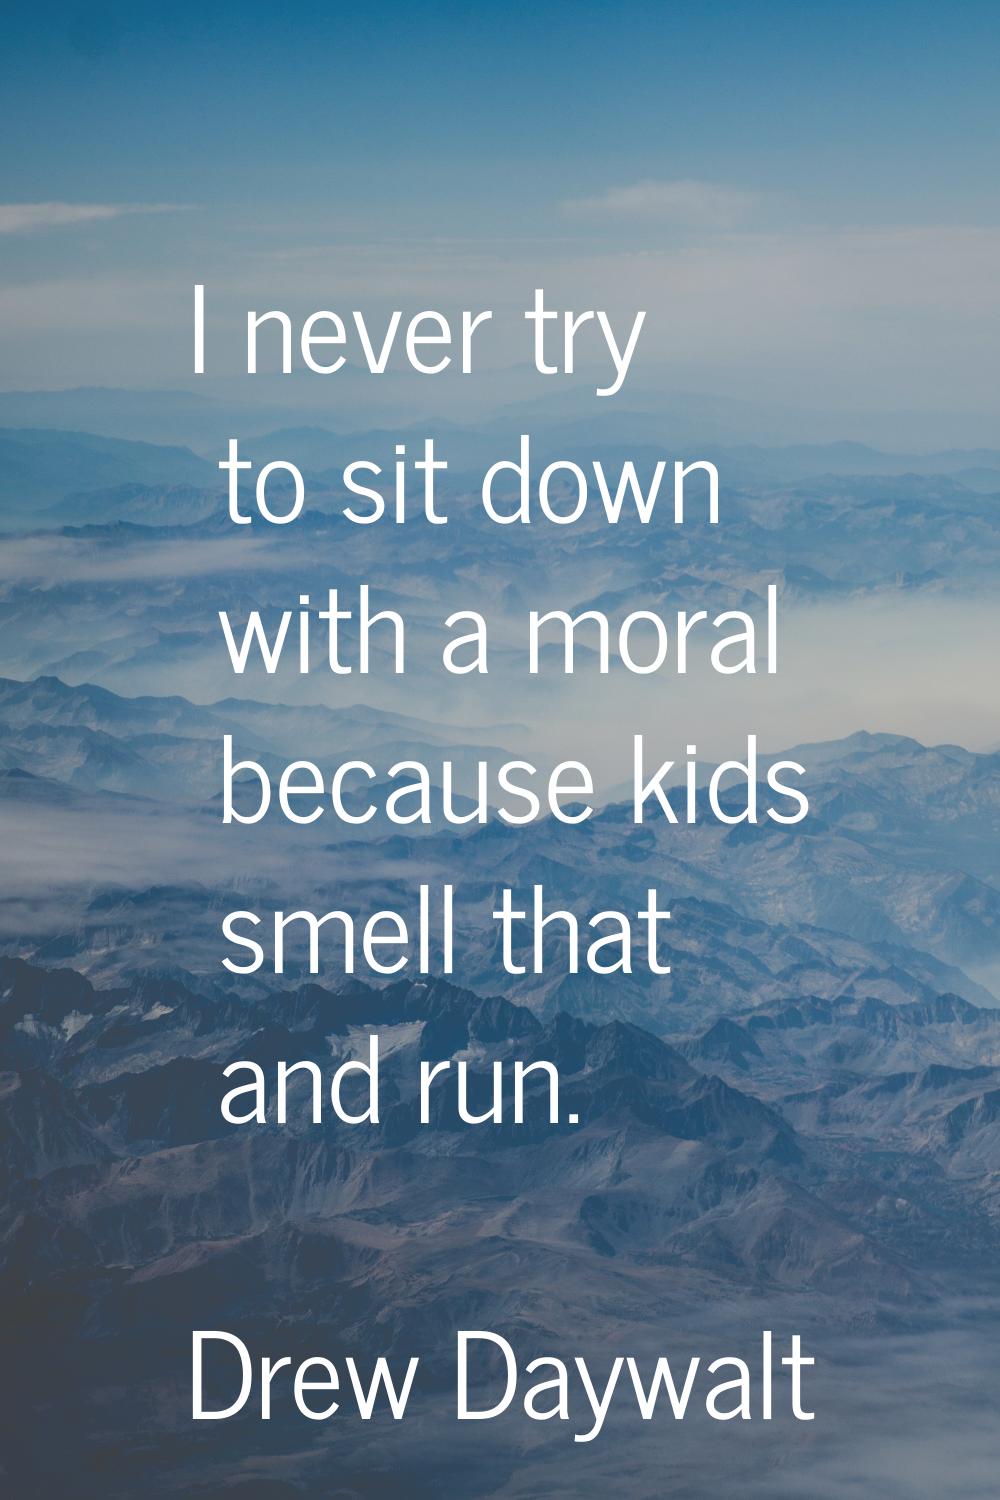 I never try to sit down with a moral because kids smell that and run.